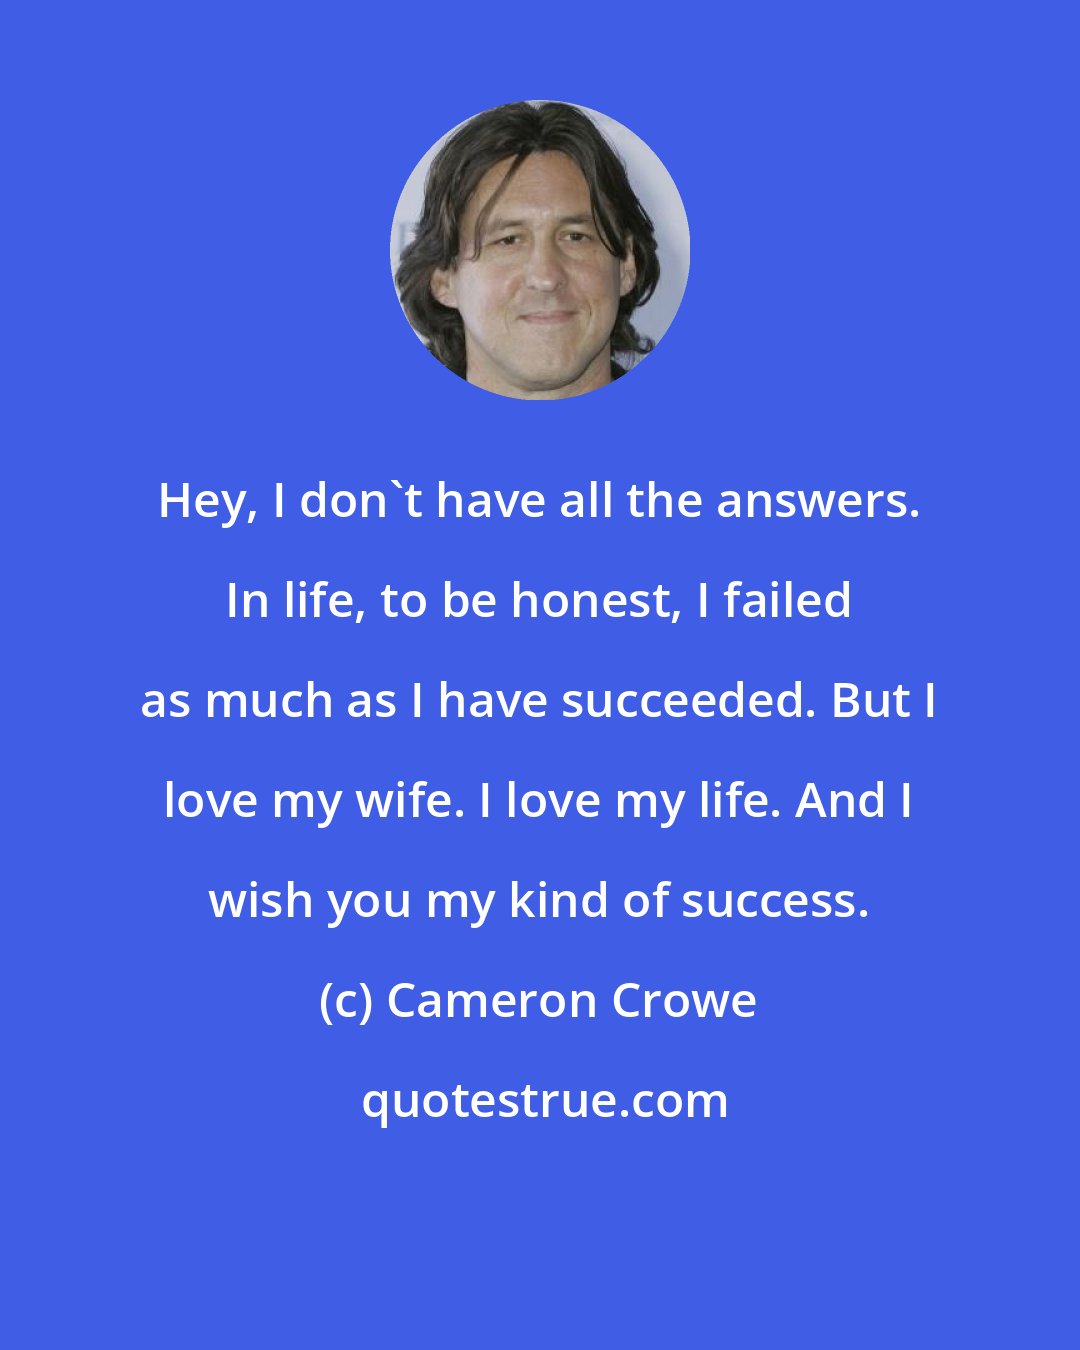 Cameron Crowe: Hey, I don't have all the answers. In life, to be honest, I failed as much as I have succeeded. But I love my wife. I love my life. And I wish you my kind of success.